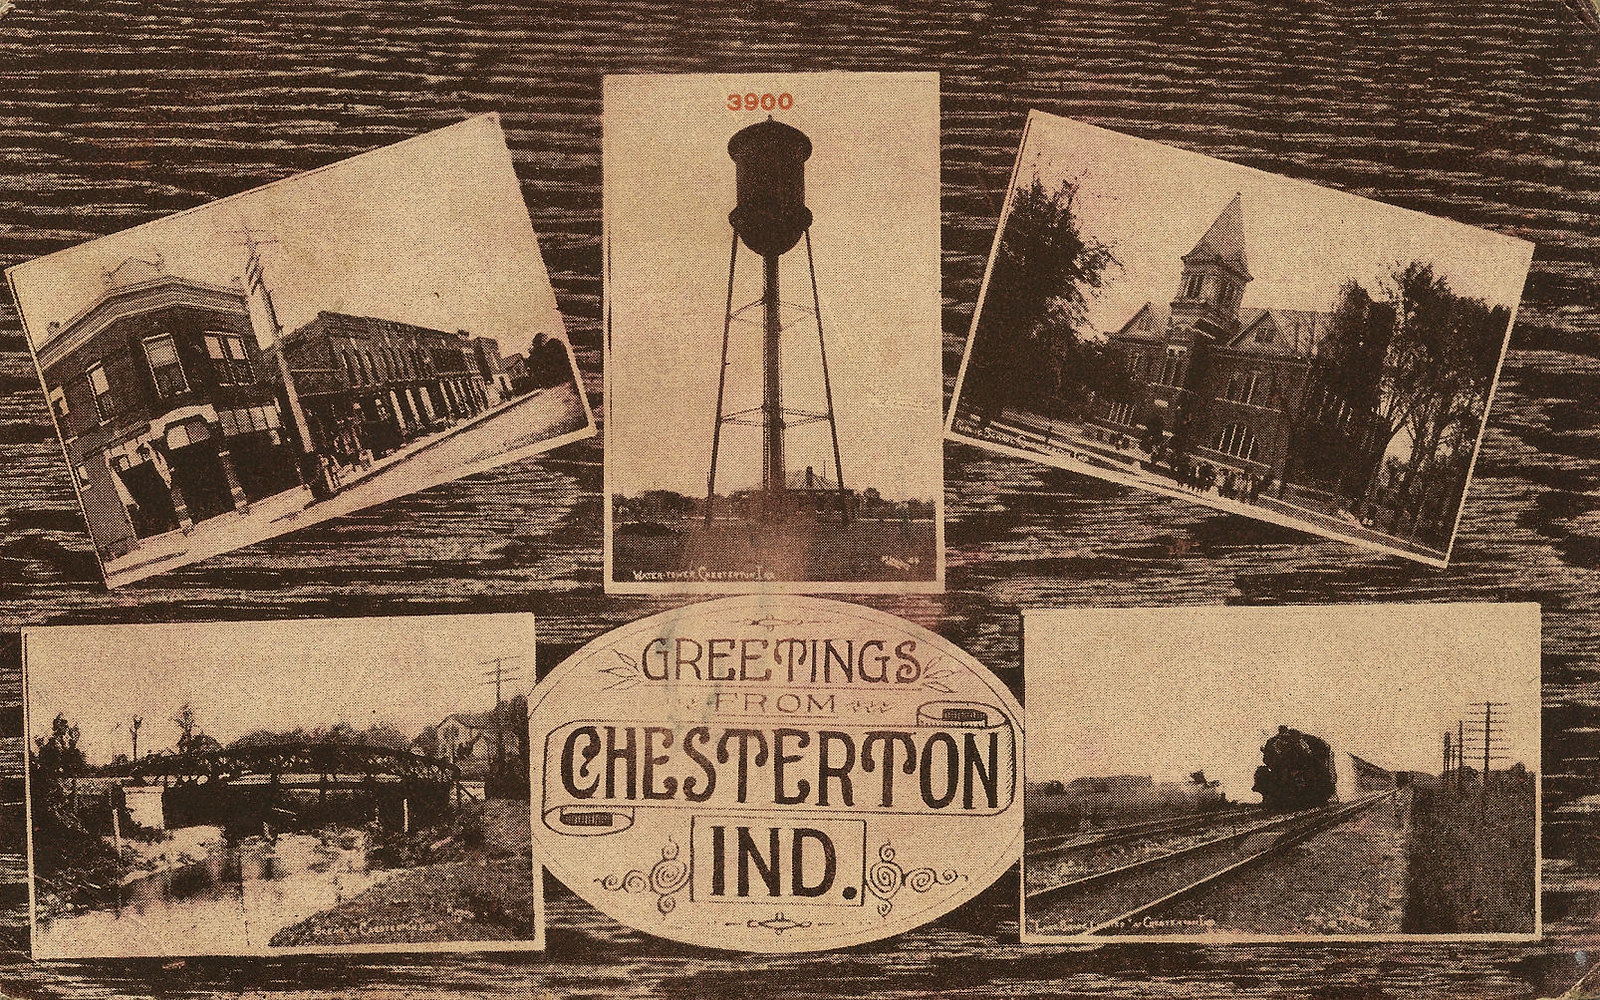 Multiview Postcard, 1912 - Chesterton, Indiana